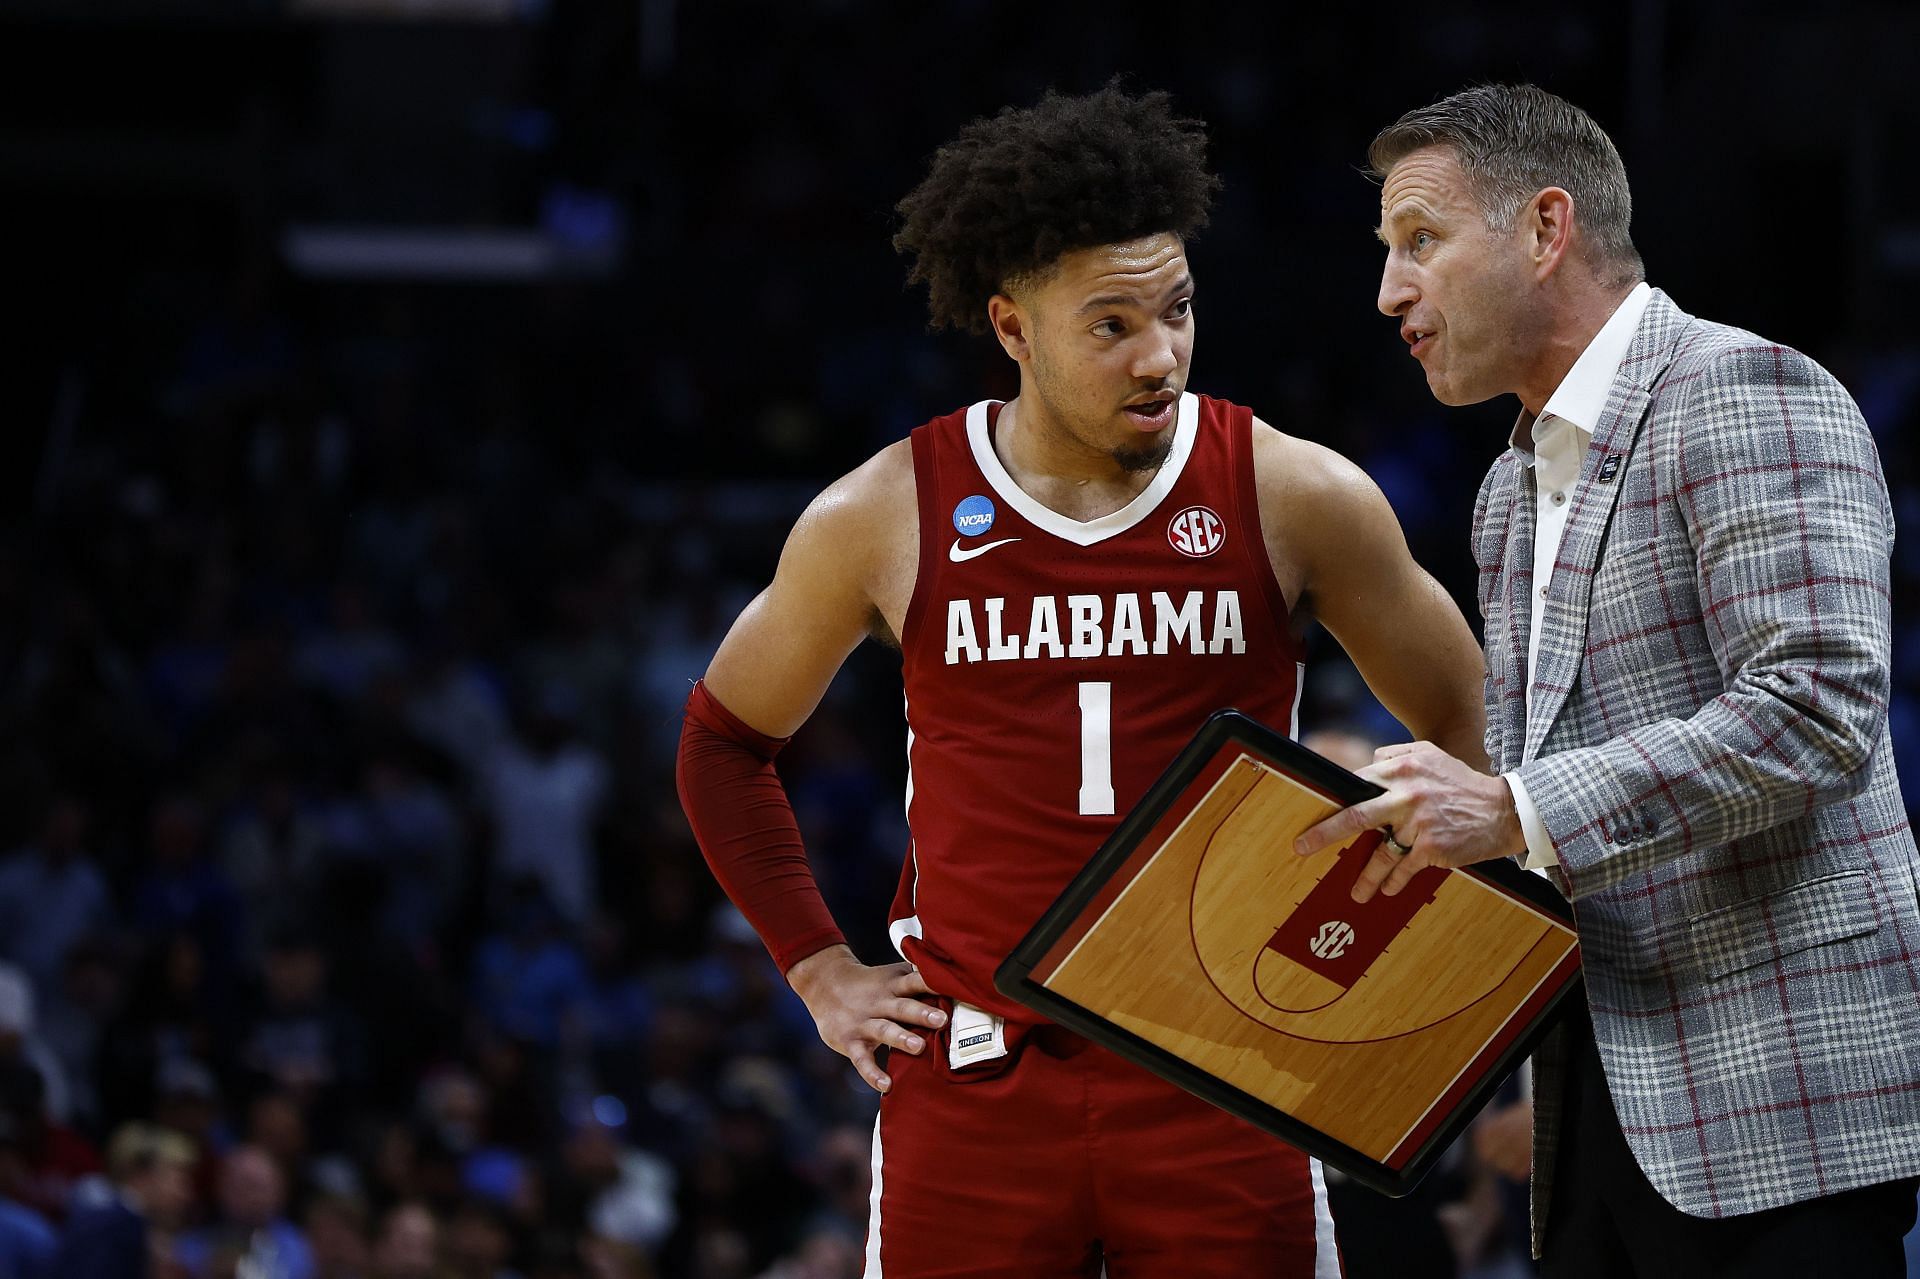 Mark Sears receives instructions from Alabama coach Nate Oats.